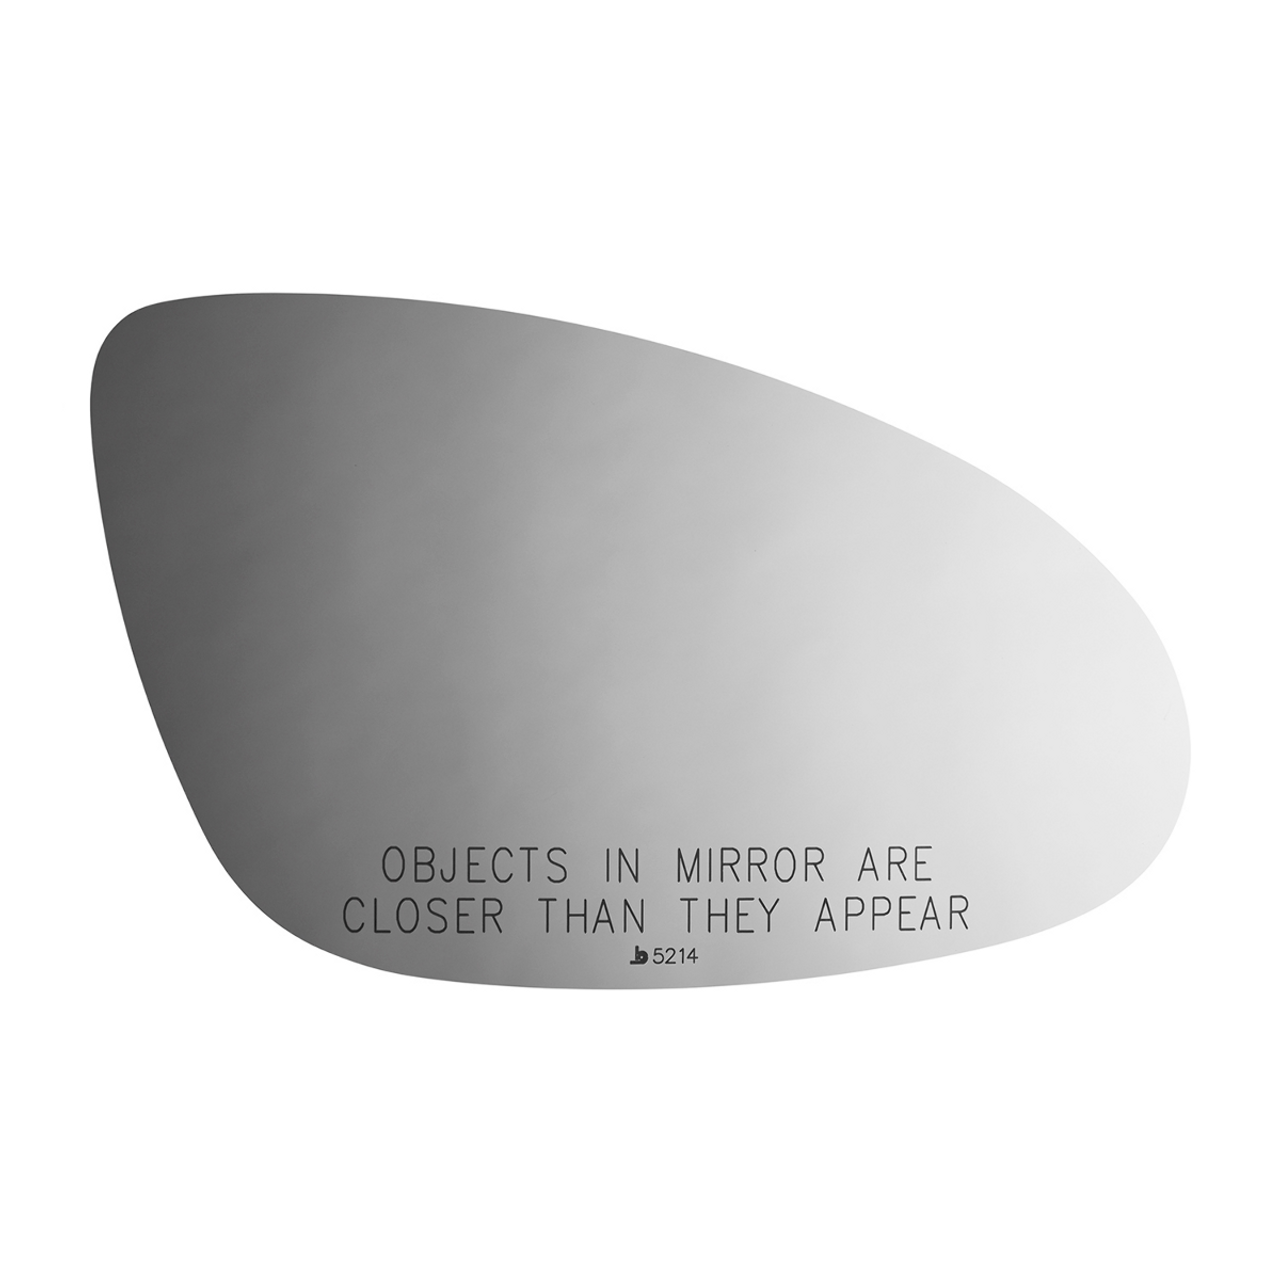 07-09 Mercedes CL550, CL600, CL63 AMG, CL65 AMG, 2006-2008 CLS500, CLS55 AMG, CLS550, CLS63 AMG, Right Passenger Convex Mirror Glass Lens w/Adhesive USA. Alternative Direct Fit Over Glass For Heated Mirrors See Details